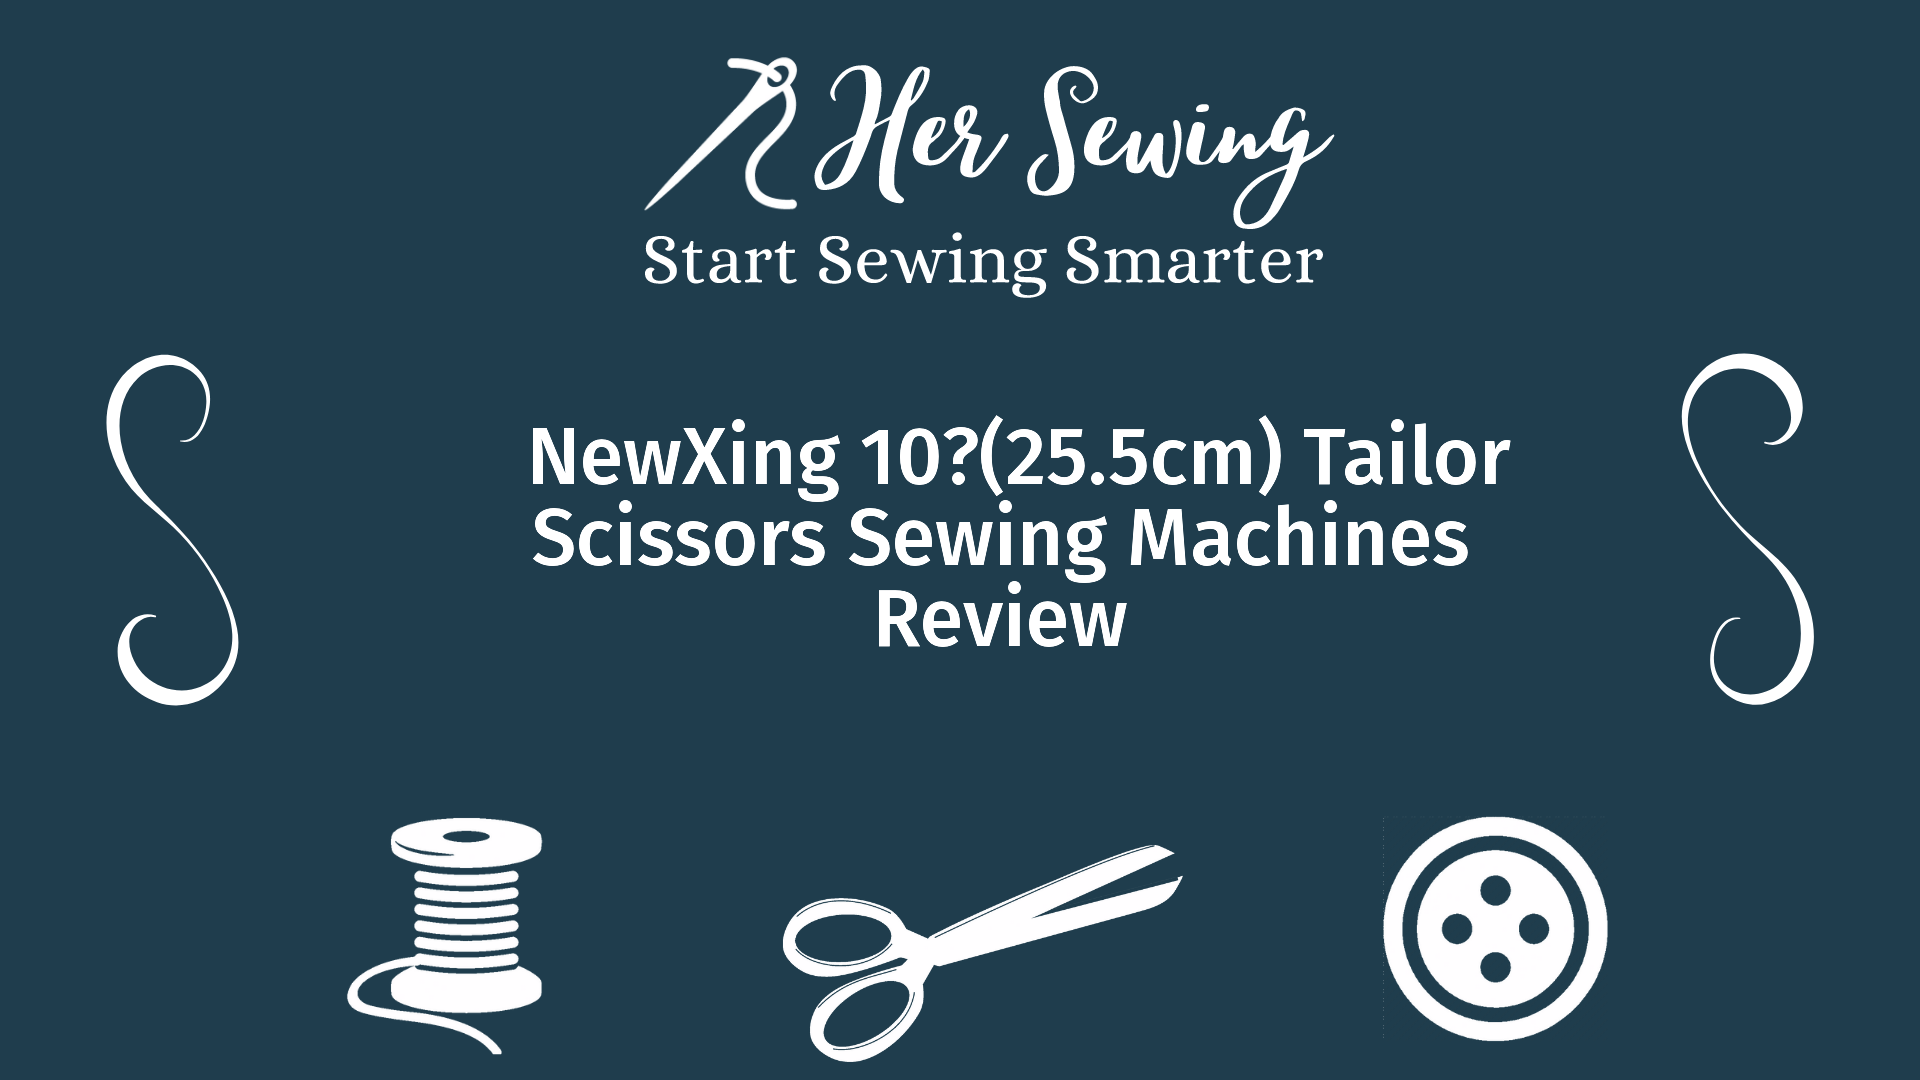 NewXing 10″(25.5cm) Tailor Scissors Sewing Machines Review